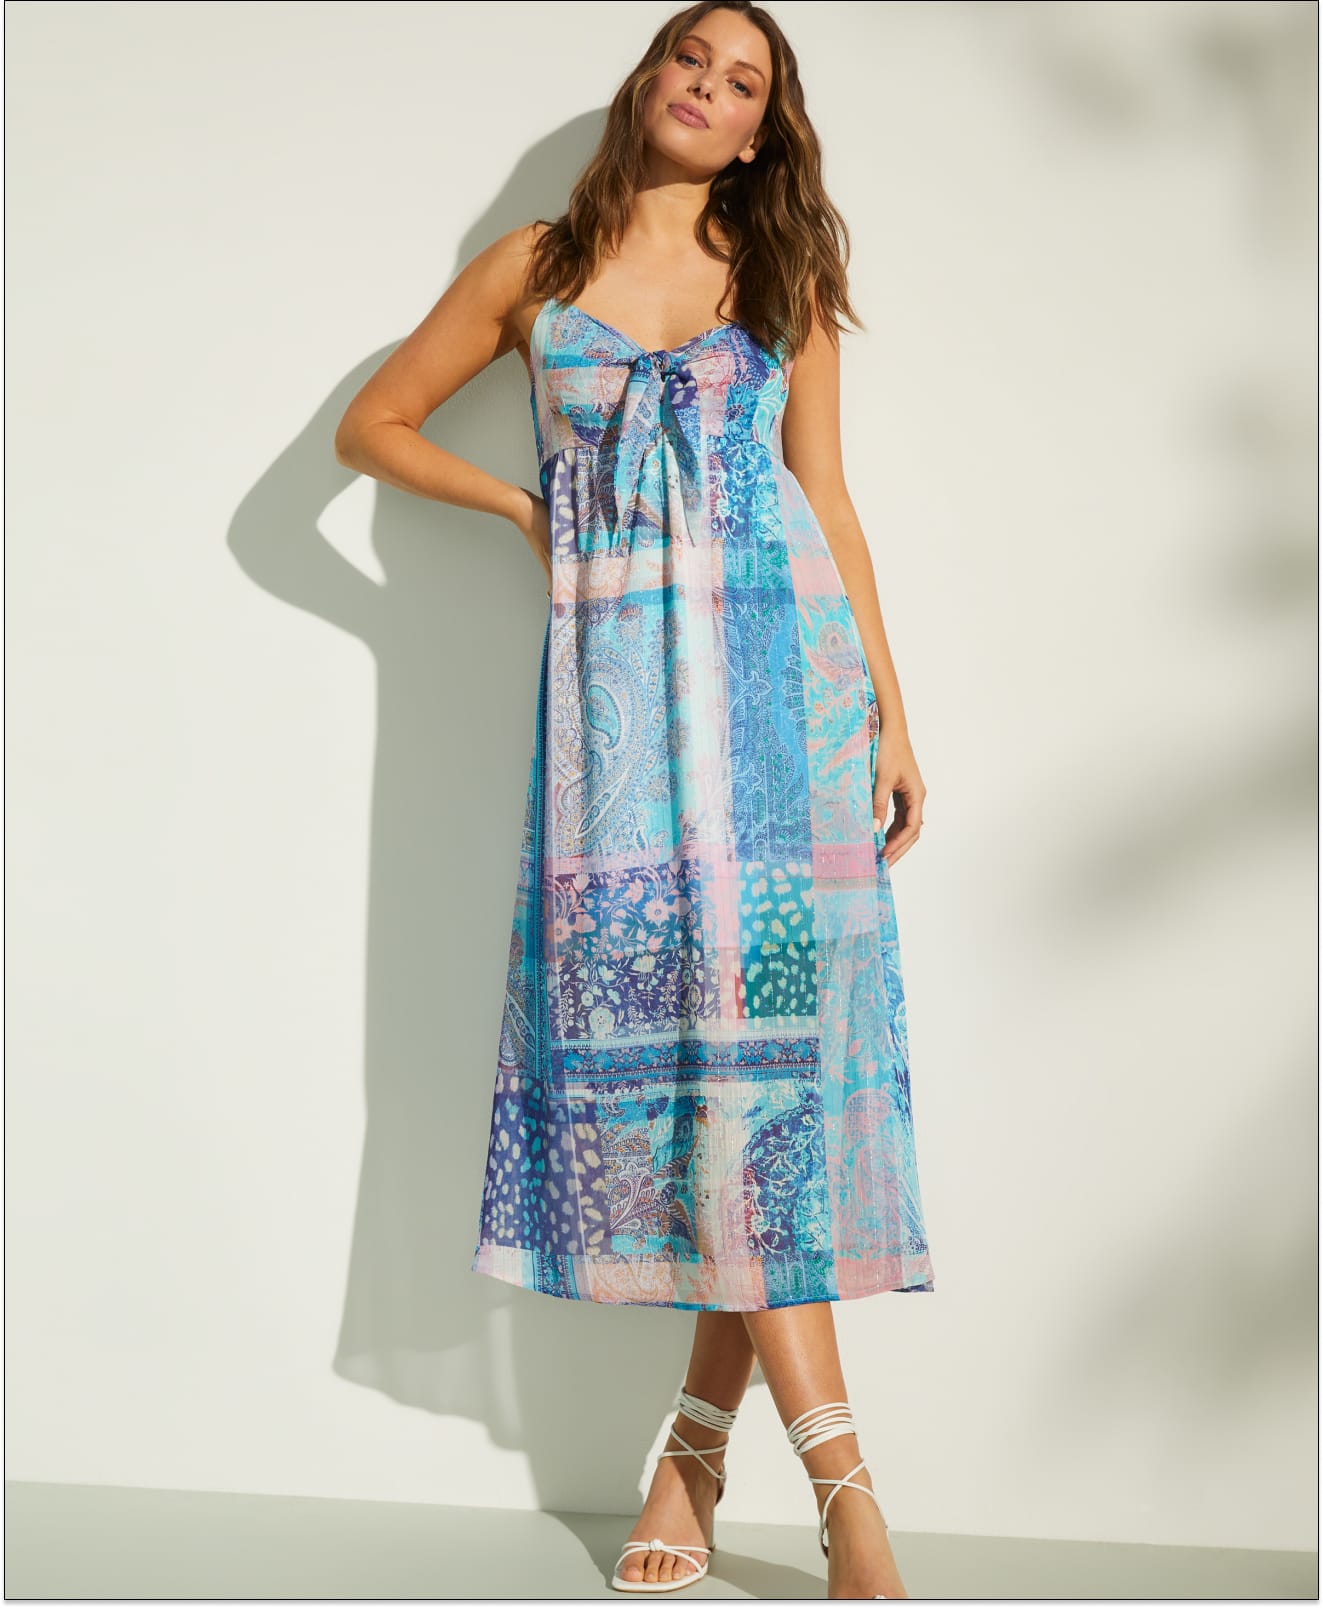 Dresses - Add These Dresses to Your Wardrobe | Just Jeans™ Online